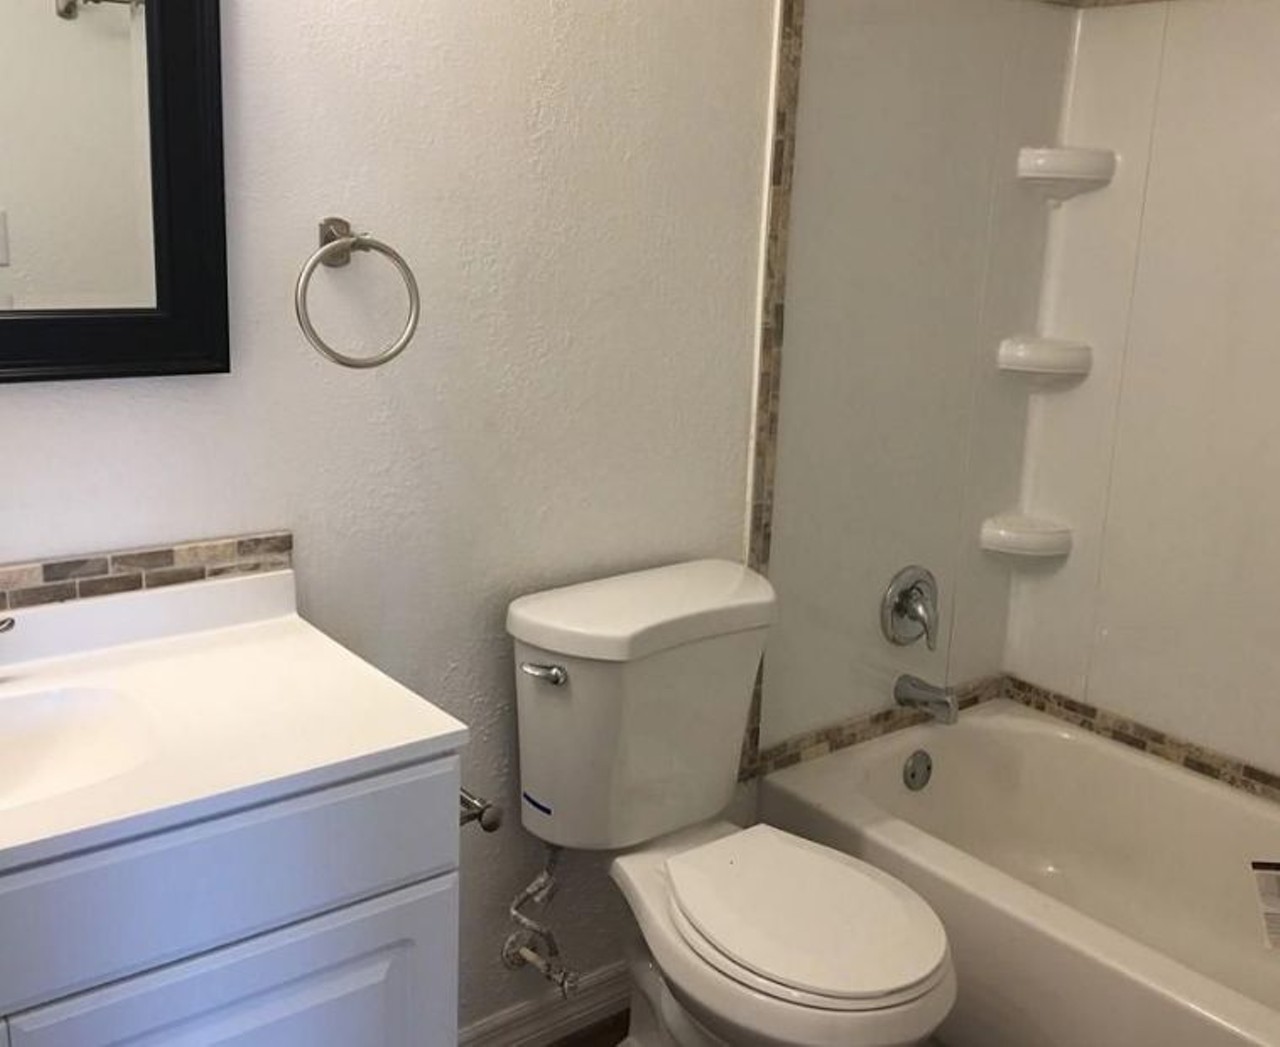 5600 Devonbriar Way, Orlando
$1,175/mo
2 bed, 2 bath, 935 sqft
Renovations stretch into both bathrooms with new hardware and tiling.